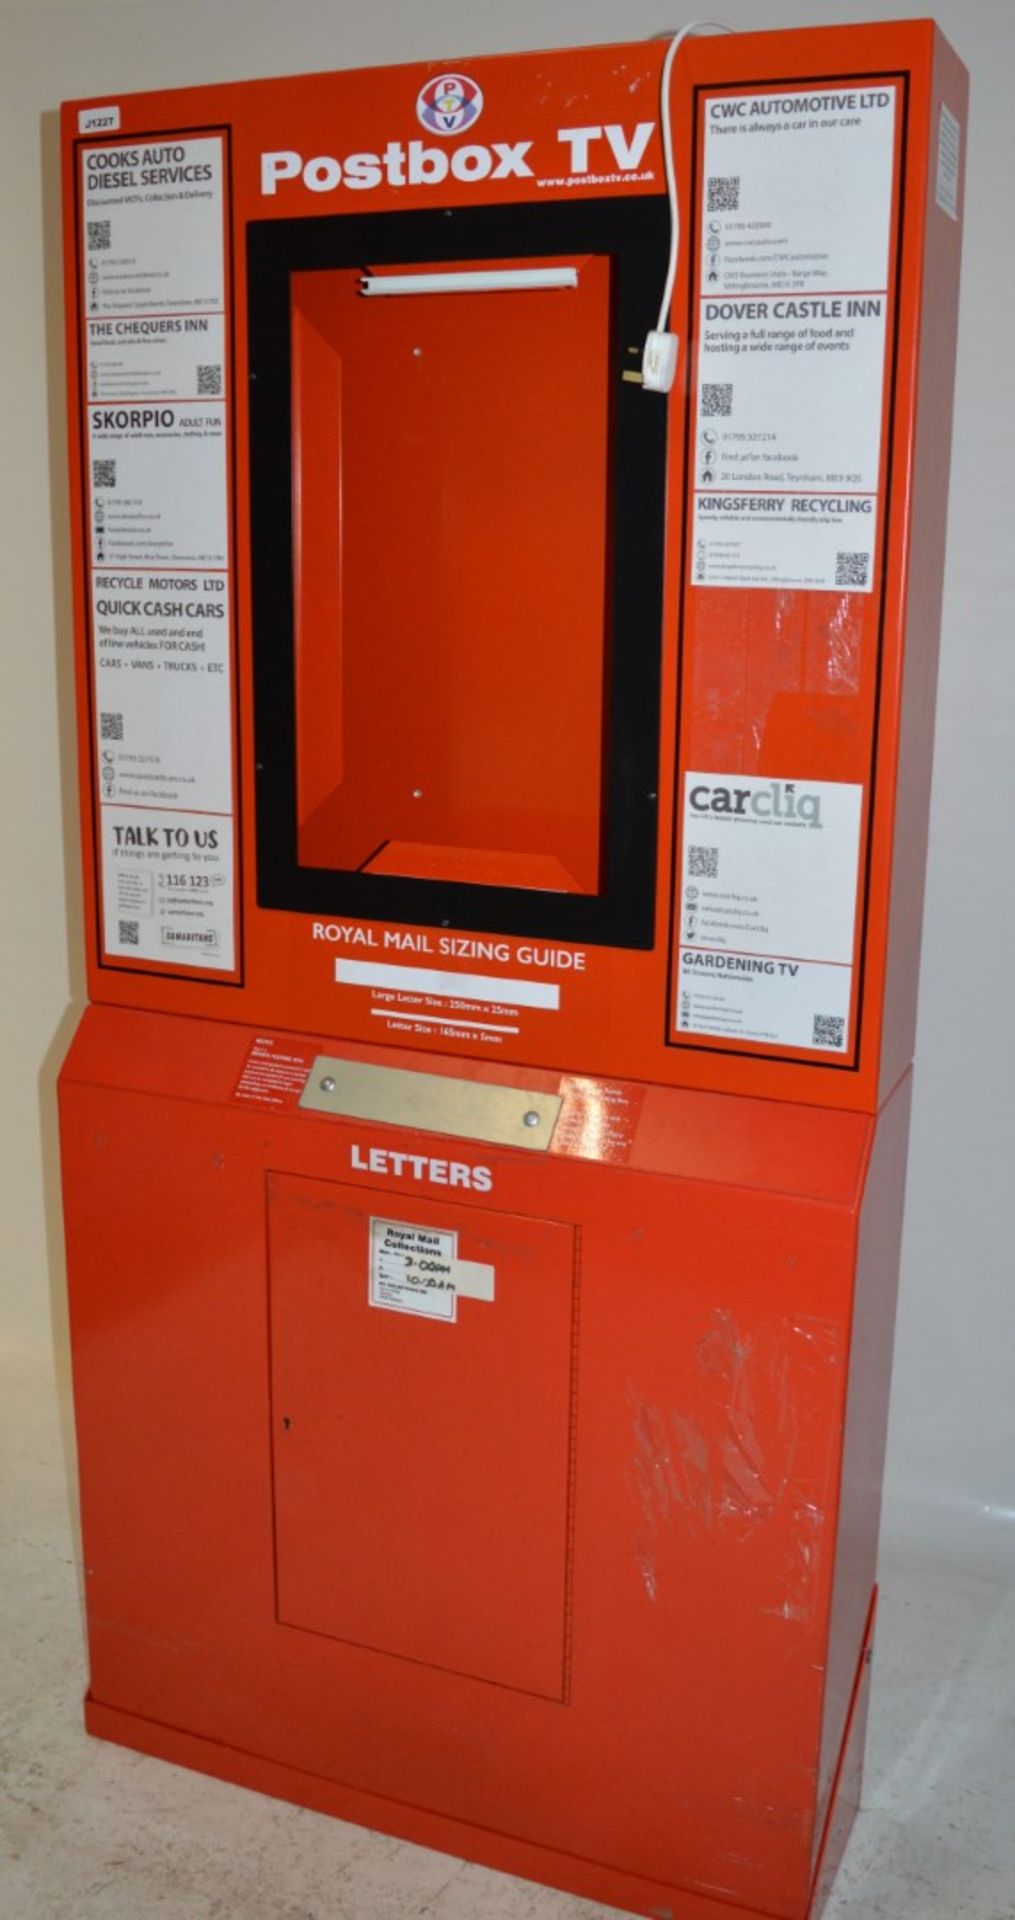 1 x Royal Mail Postbox TV Enclosure - Red Steel Advertising Enclosure With Removable Decals - H187 x